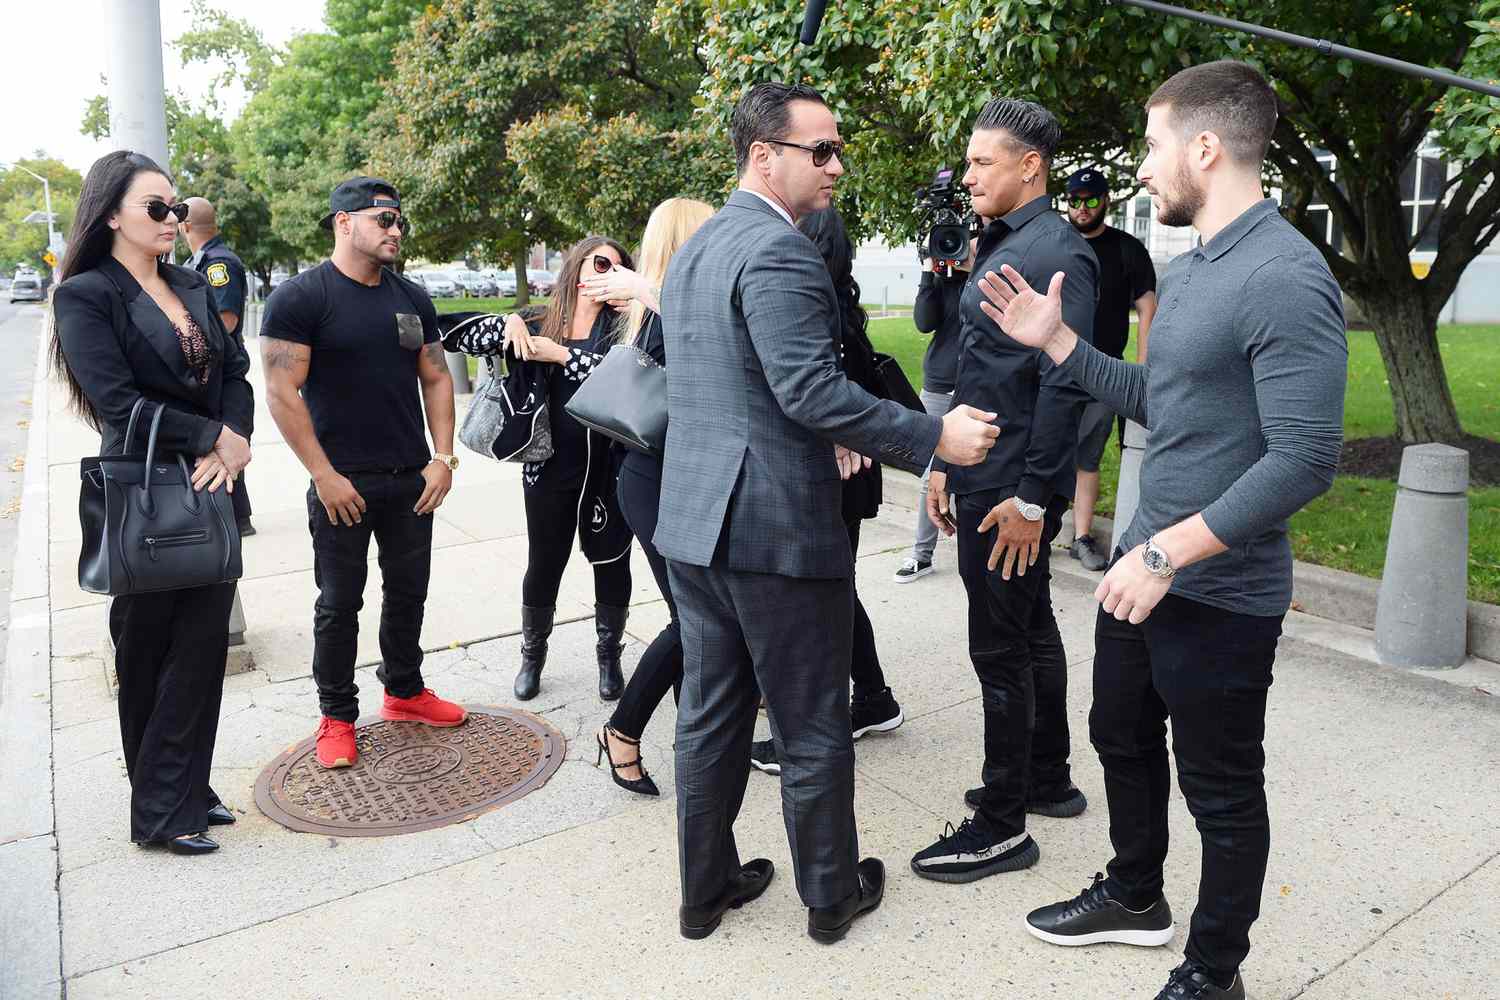 (Jersey Shore Members huging Mike (The Situation) Sorrentino photogaphed arriving at Newwark Nj court were he is to be sentenced for tax evasion